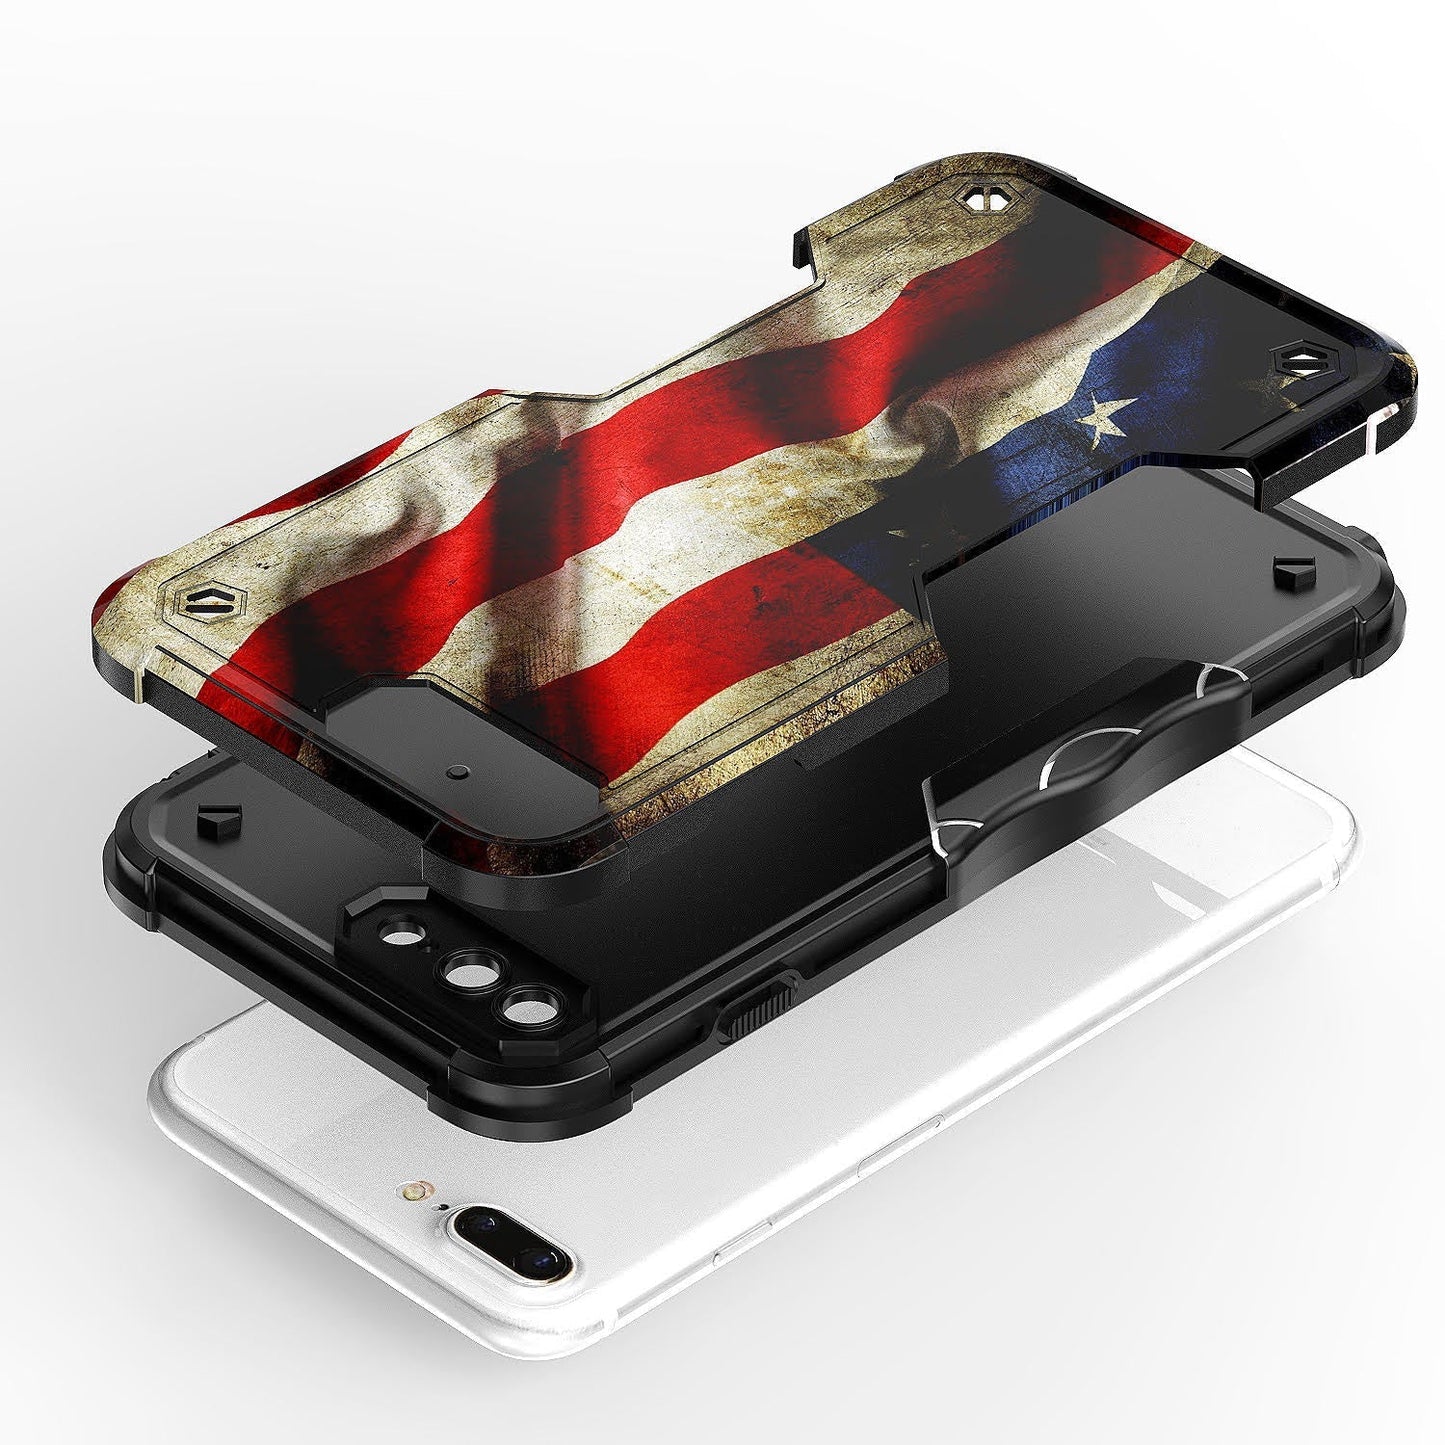 Case For Apple iPhone 8 Plus - Hybrid Grip Design Shockproof Phone Cover - American Flag